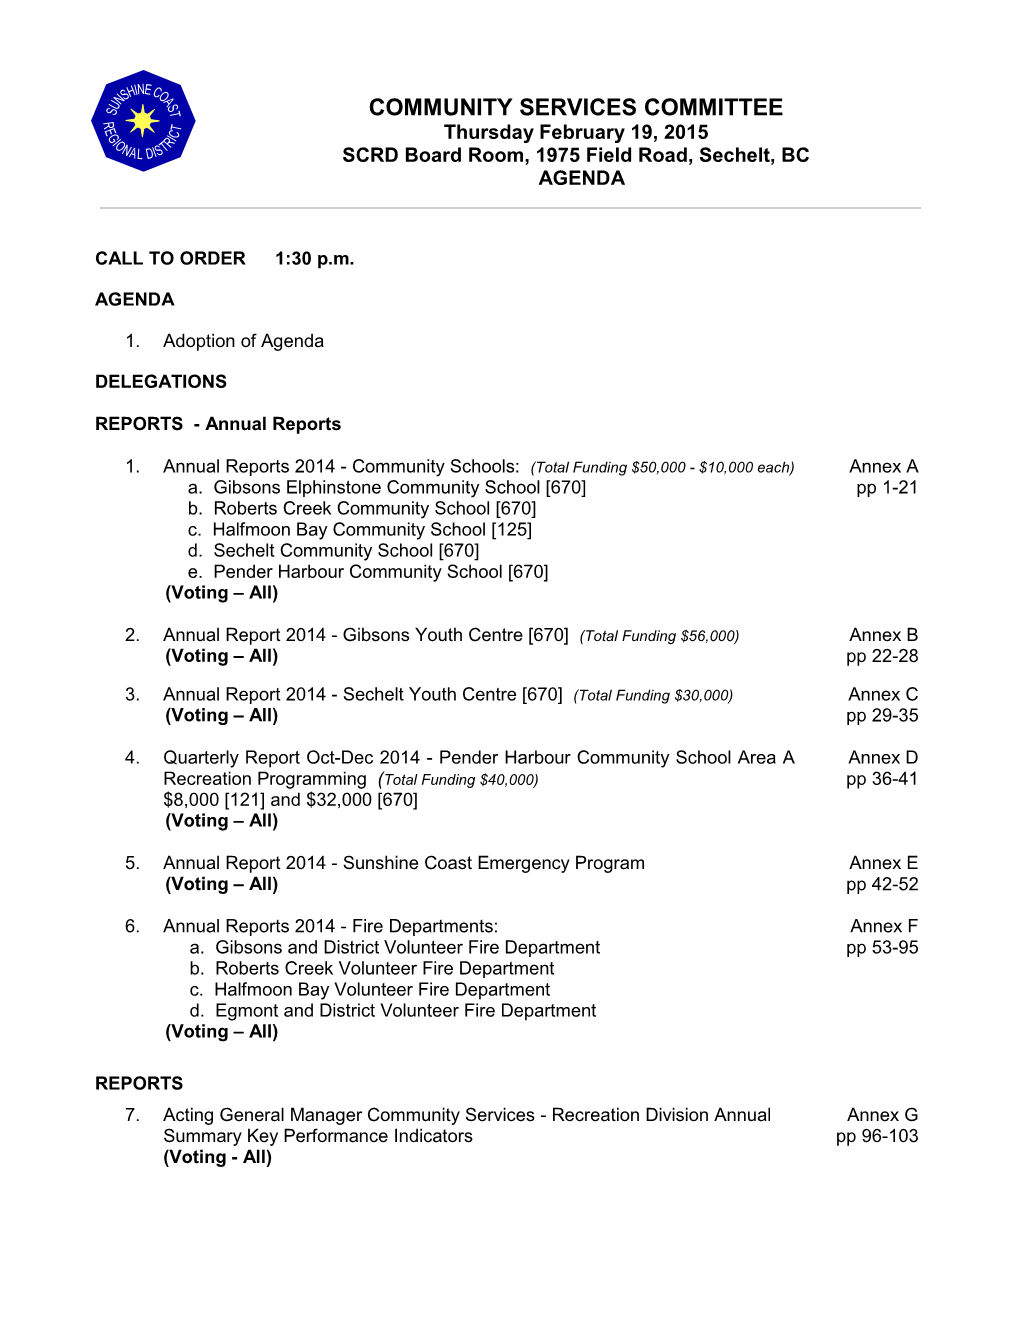 COMMUNITY SERVICES COMMITTEE Thursday February 19, 2015 SCRD Board Room, 1975 Field Road, Sechelt, BC AGENDA